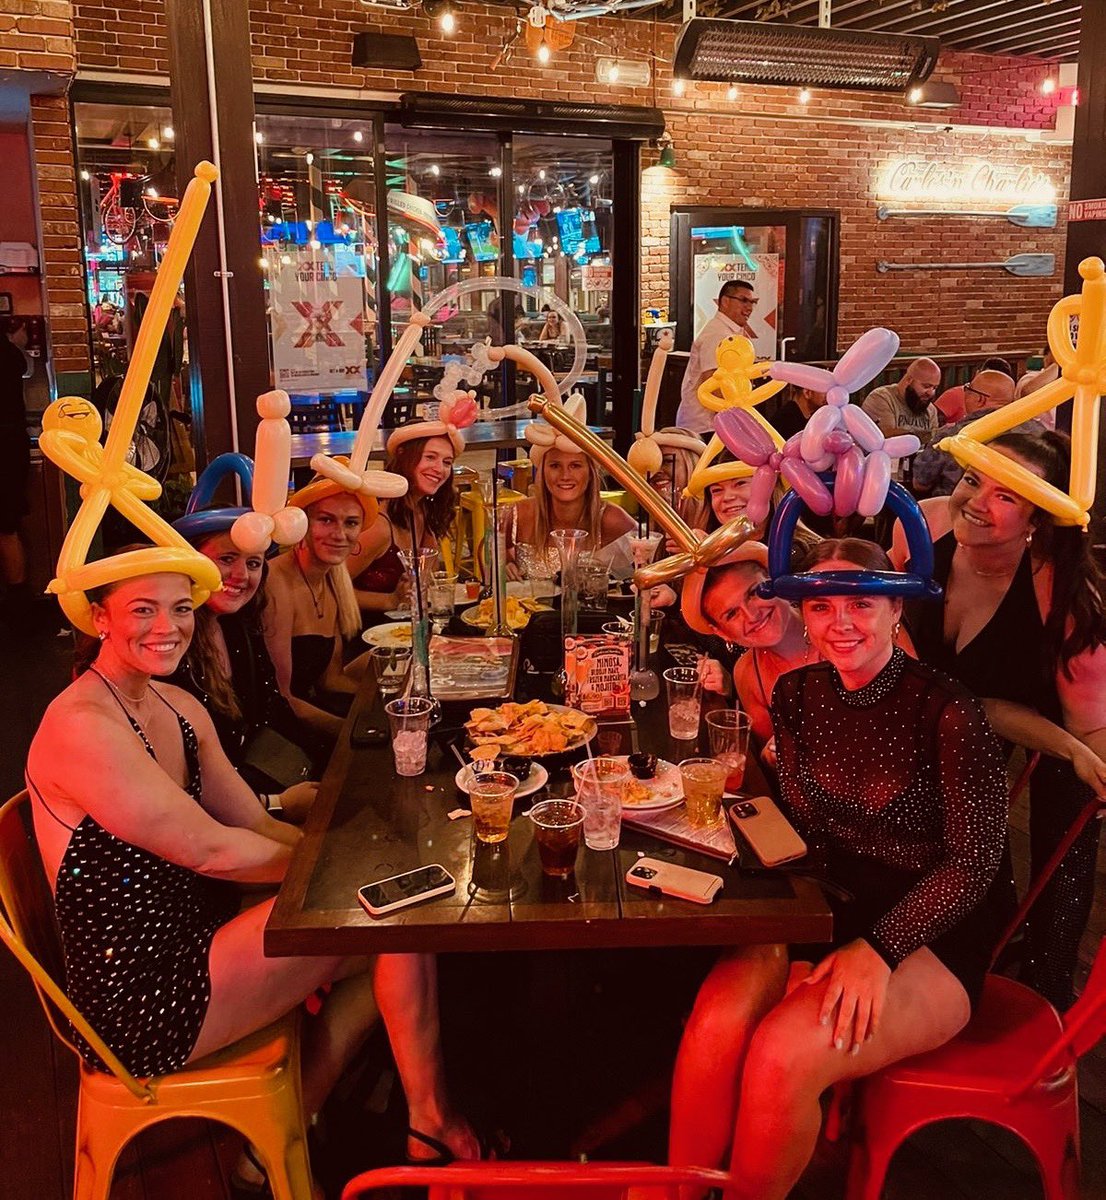 Come party with a side of dinner! 🥳

•
•

#vegas #lasvegas #carlosncharlieslasvegas #carlosncharlies #lasvegashappyhour #vegashappyhour #lasvegasdrinks #vegasdrinks #lasvegasfood #vegasfood #lasvegasparty #vegasparty #vegasdining #lasvegasdining #lasvegasdinner #vegasdinner